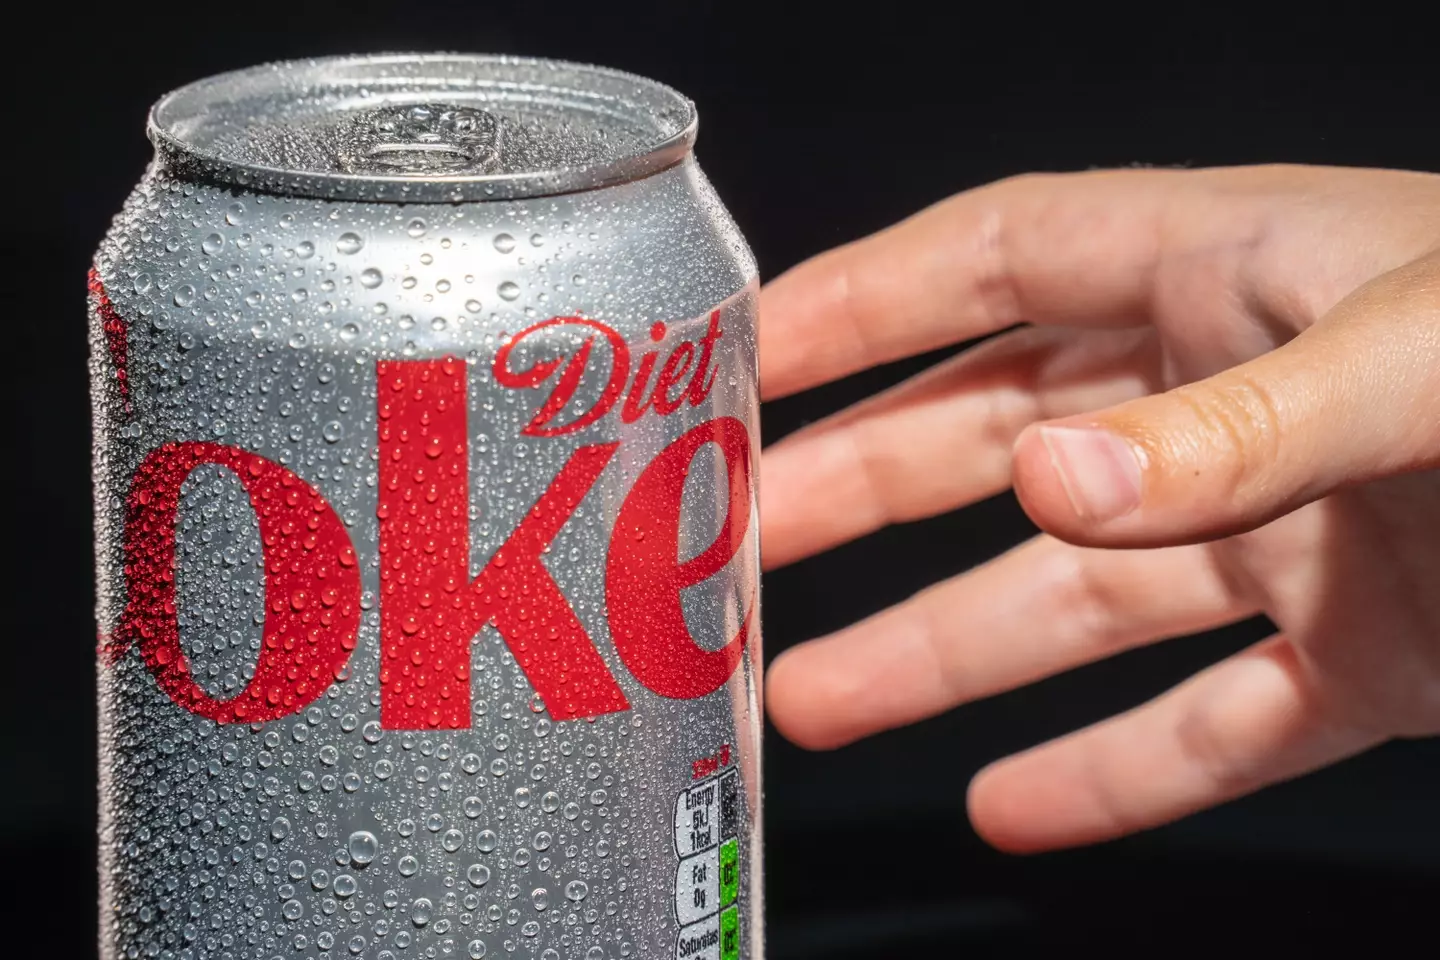 Pharmacist Niraj Naik recommended reaching for a more nutritious drink than Diet Coke.